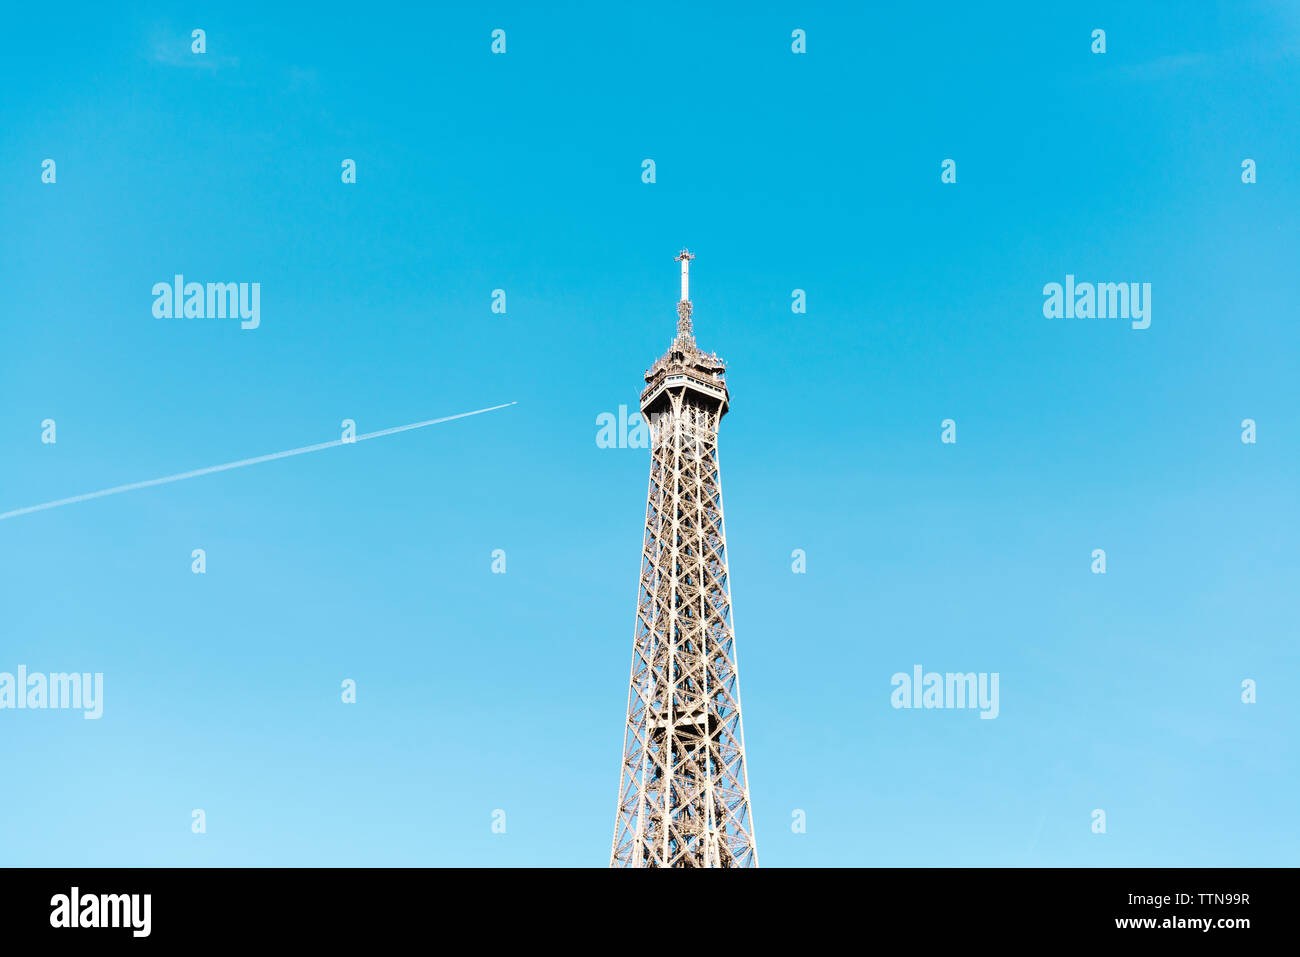 Low angle view of Eiffel Tower against blue sky Banque D'Images